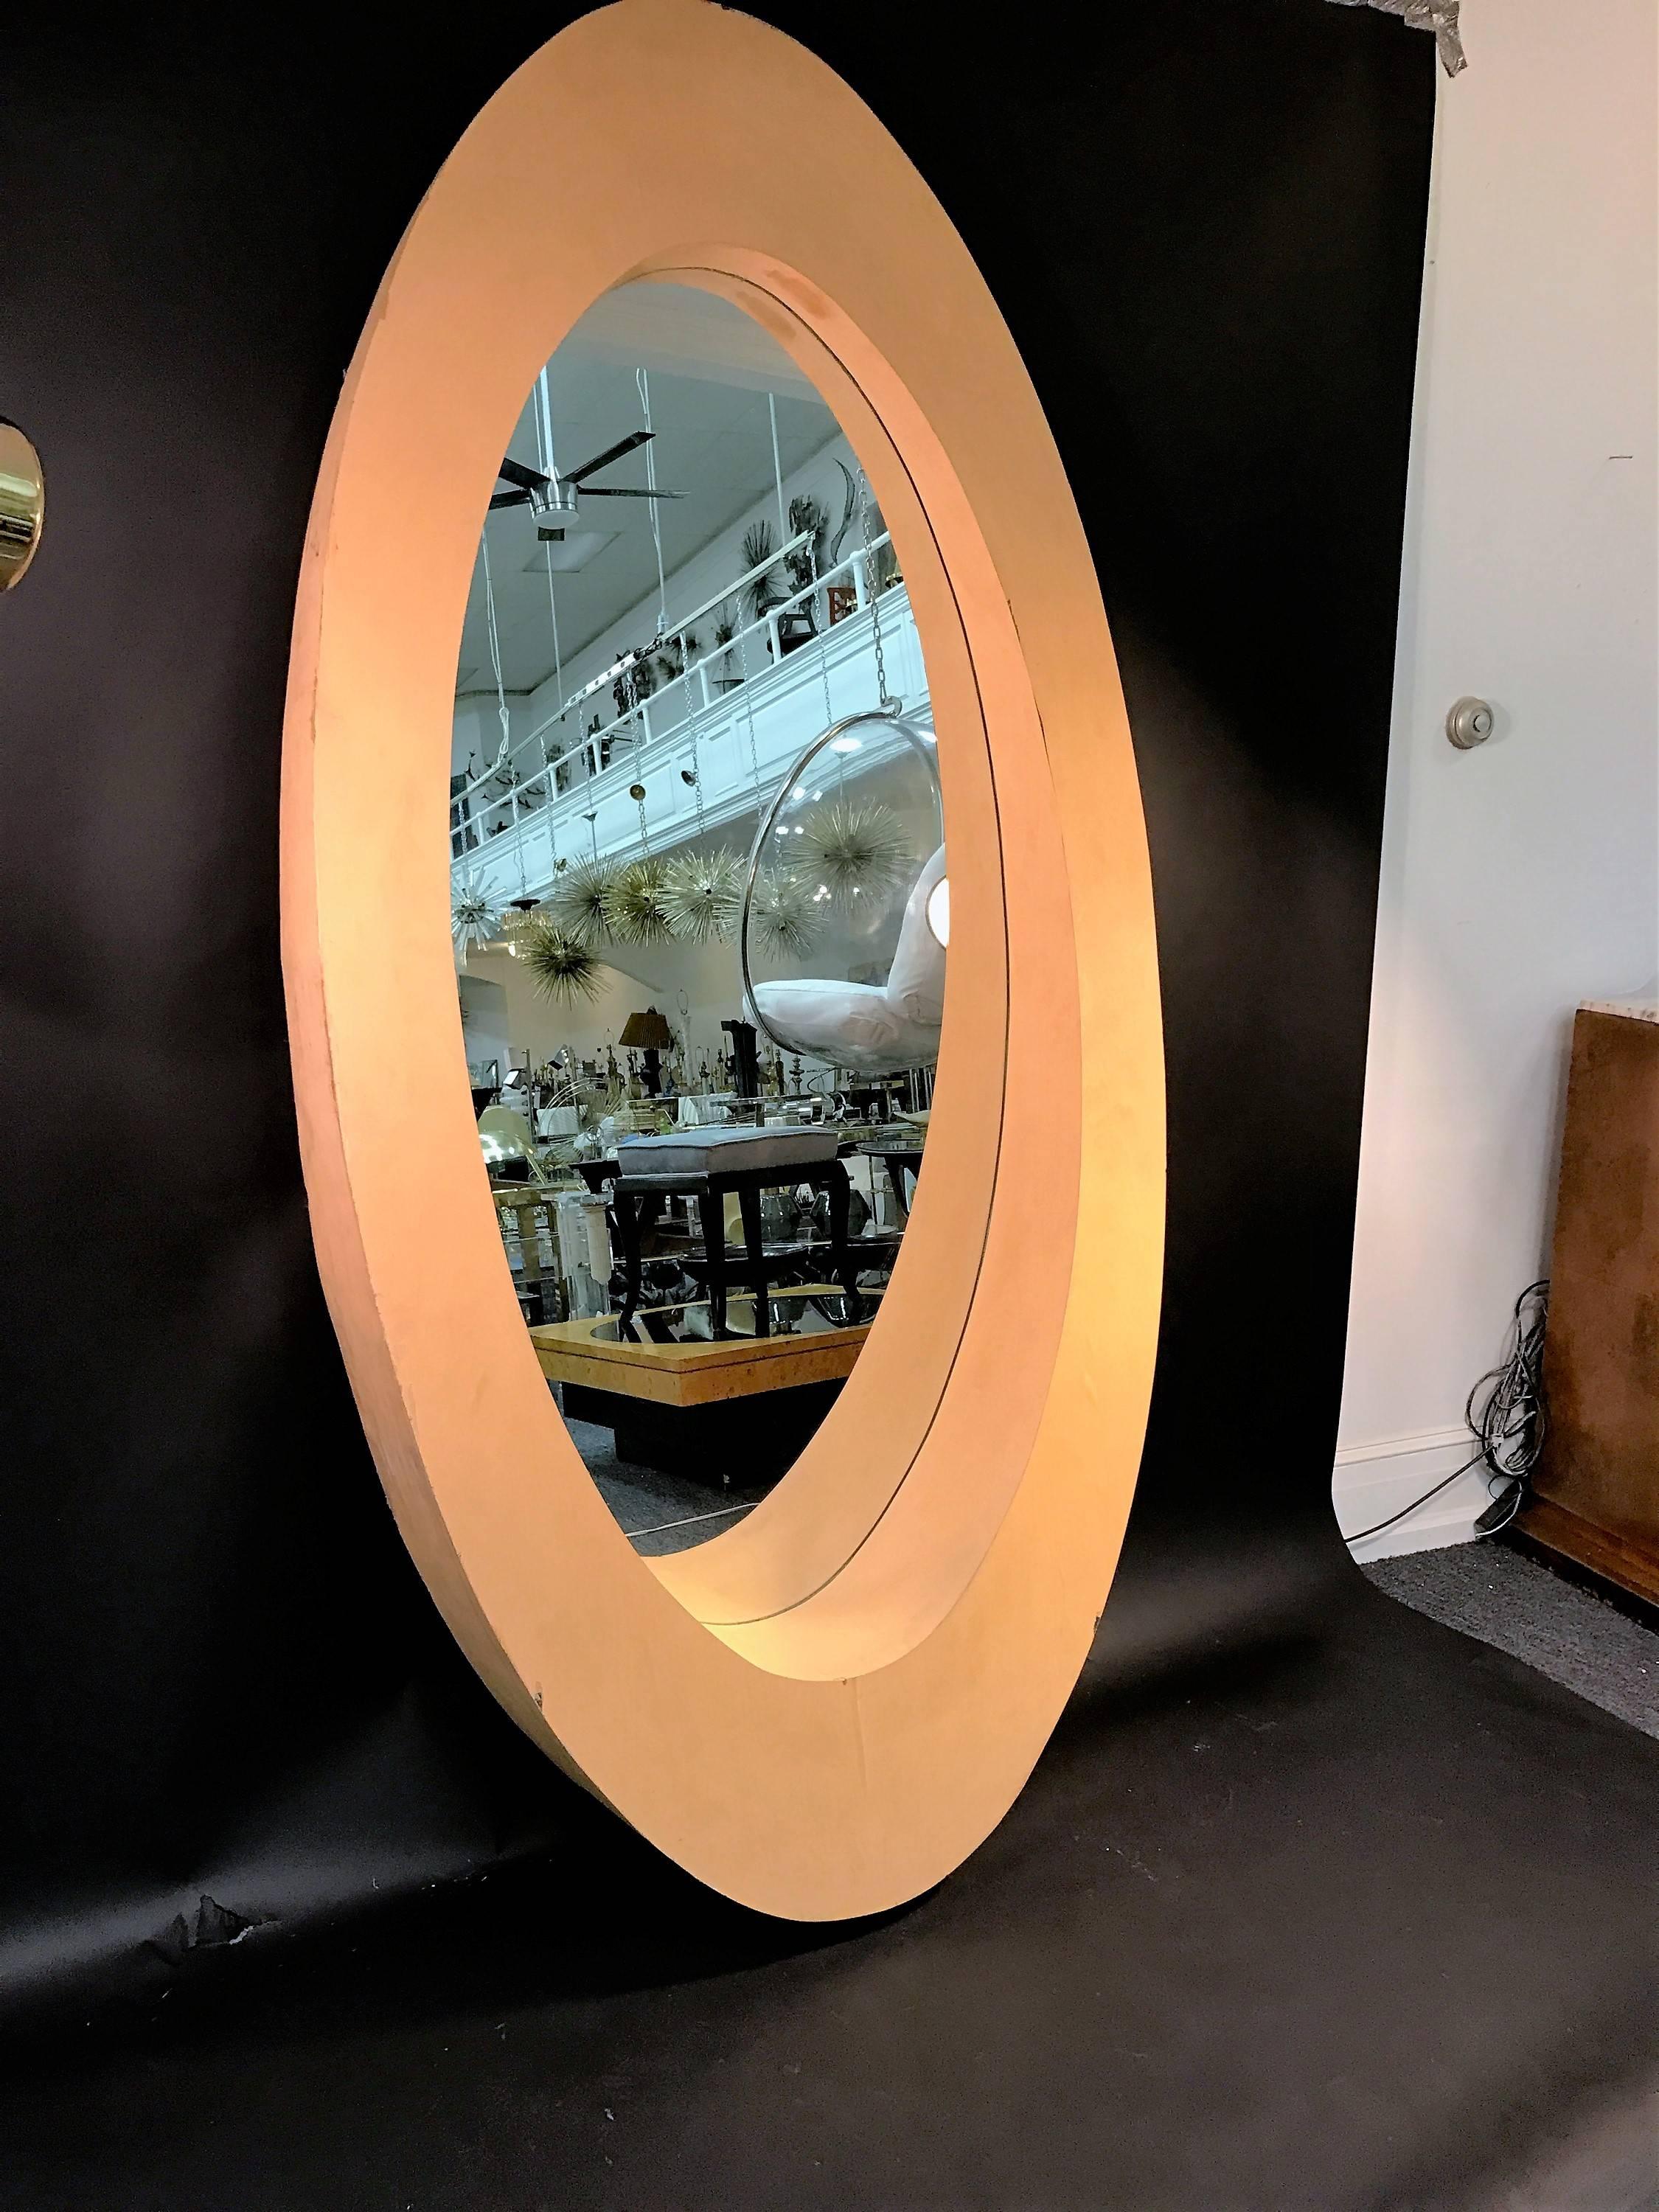 Amazing Monumental Pair of 1970s Elliptical Wood Modern Mirrors For Sale 4